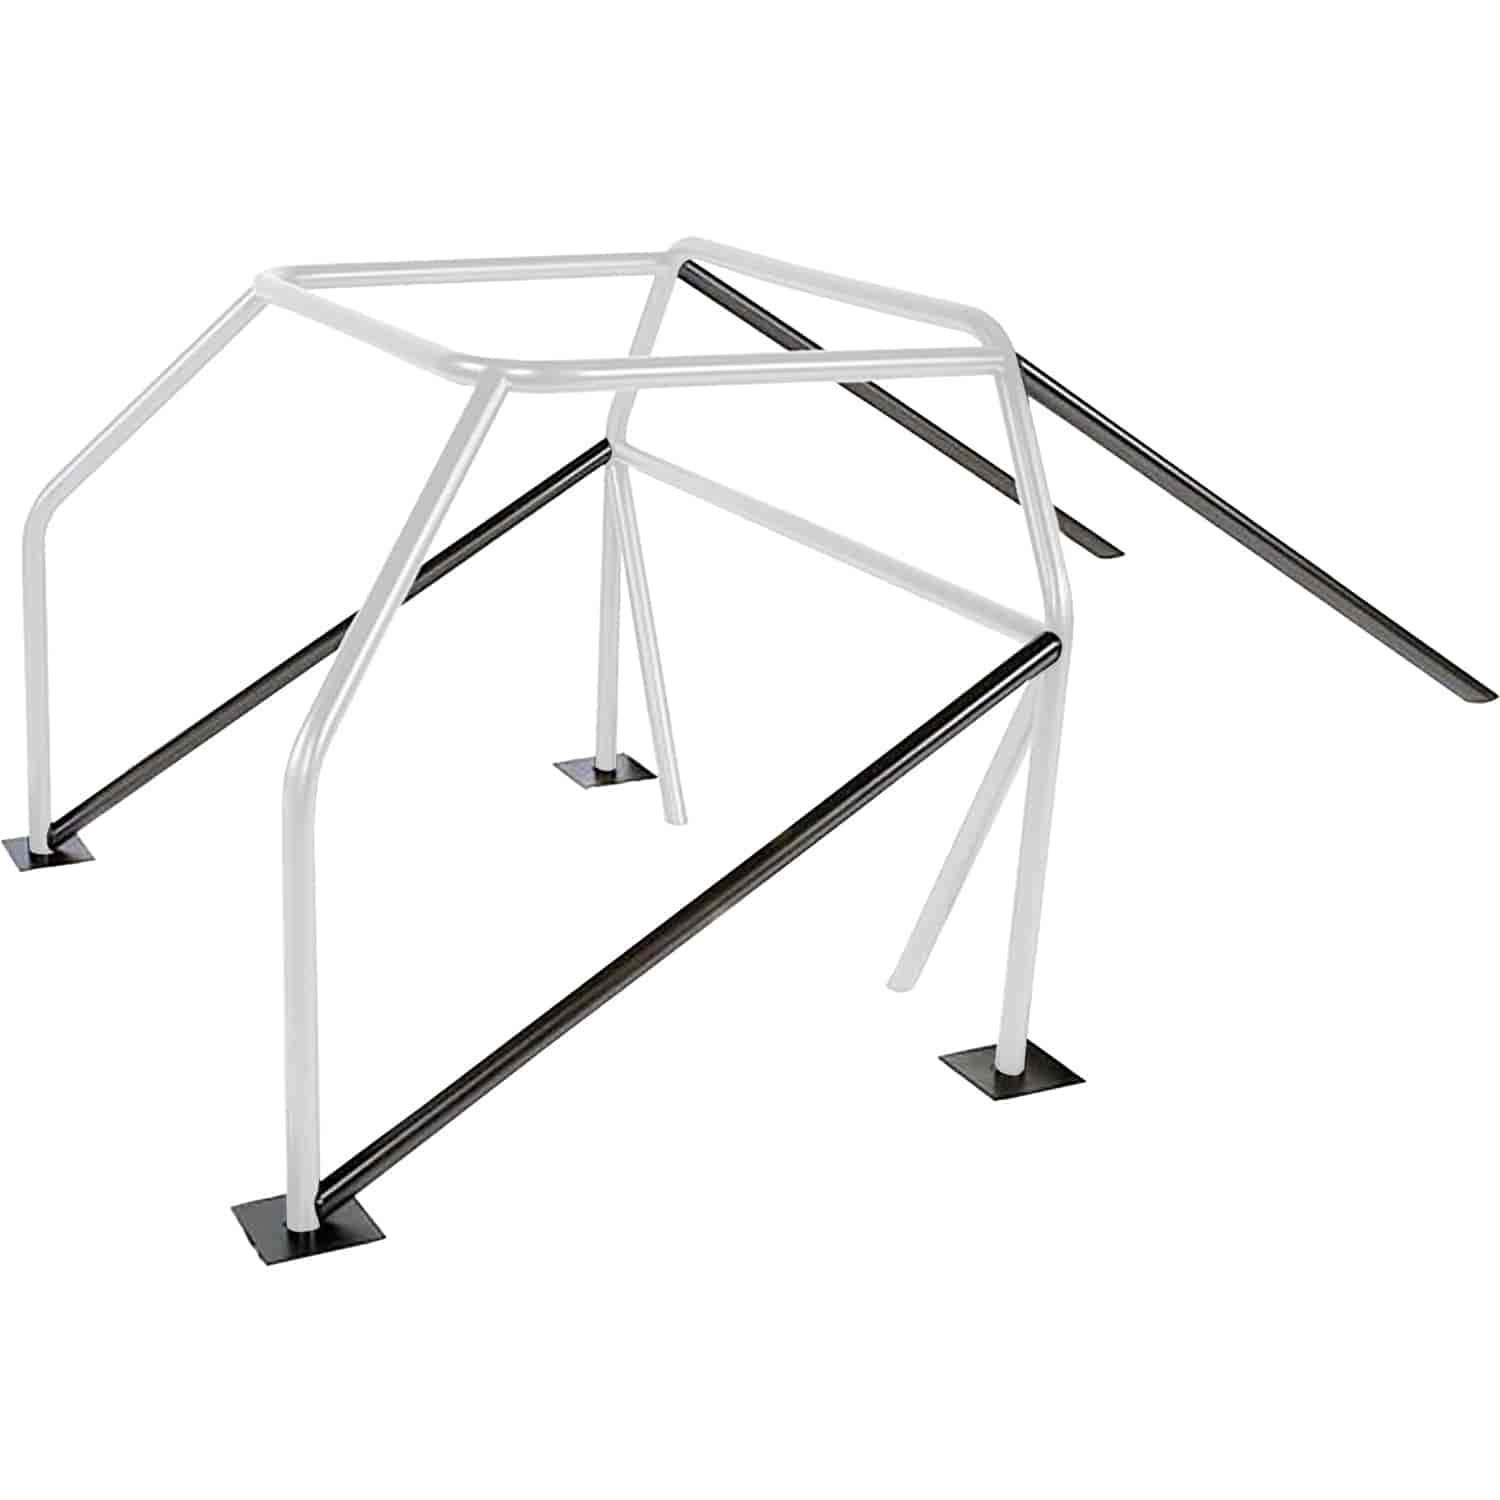 Strut Kit for 10-Point Roll Cage - Universal, Chrome Moly